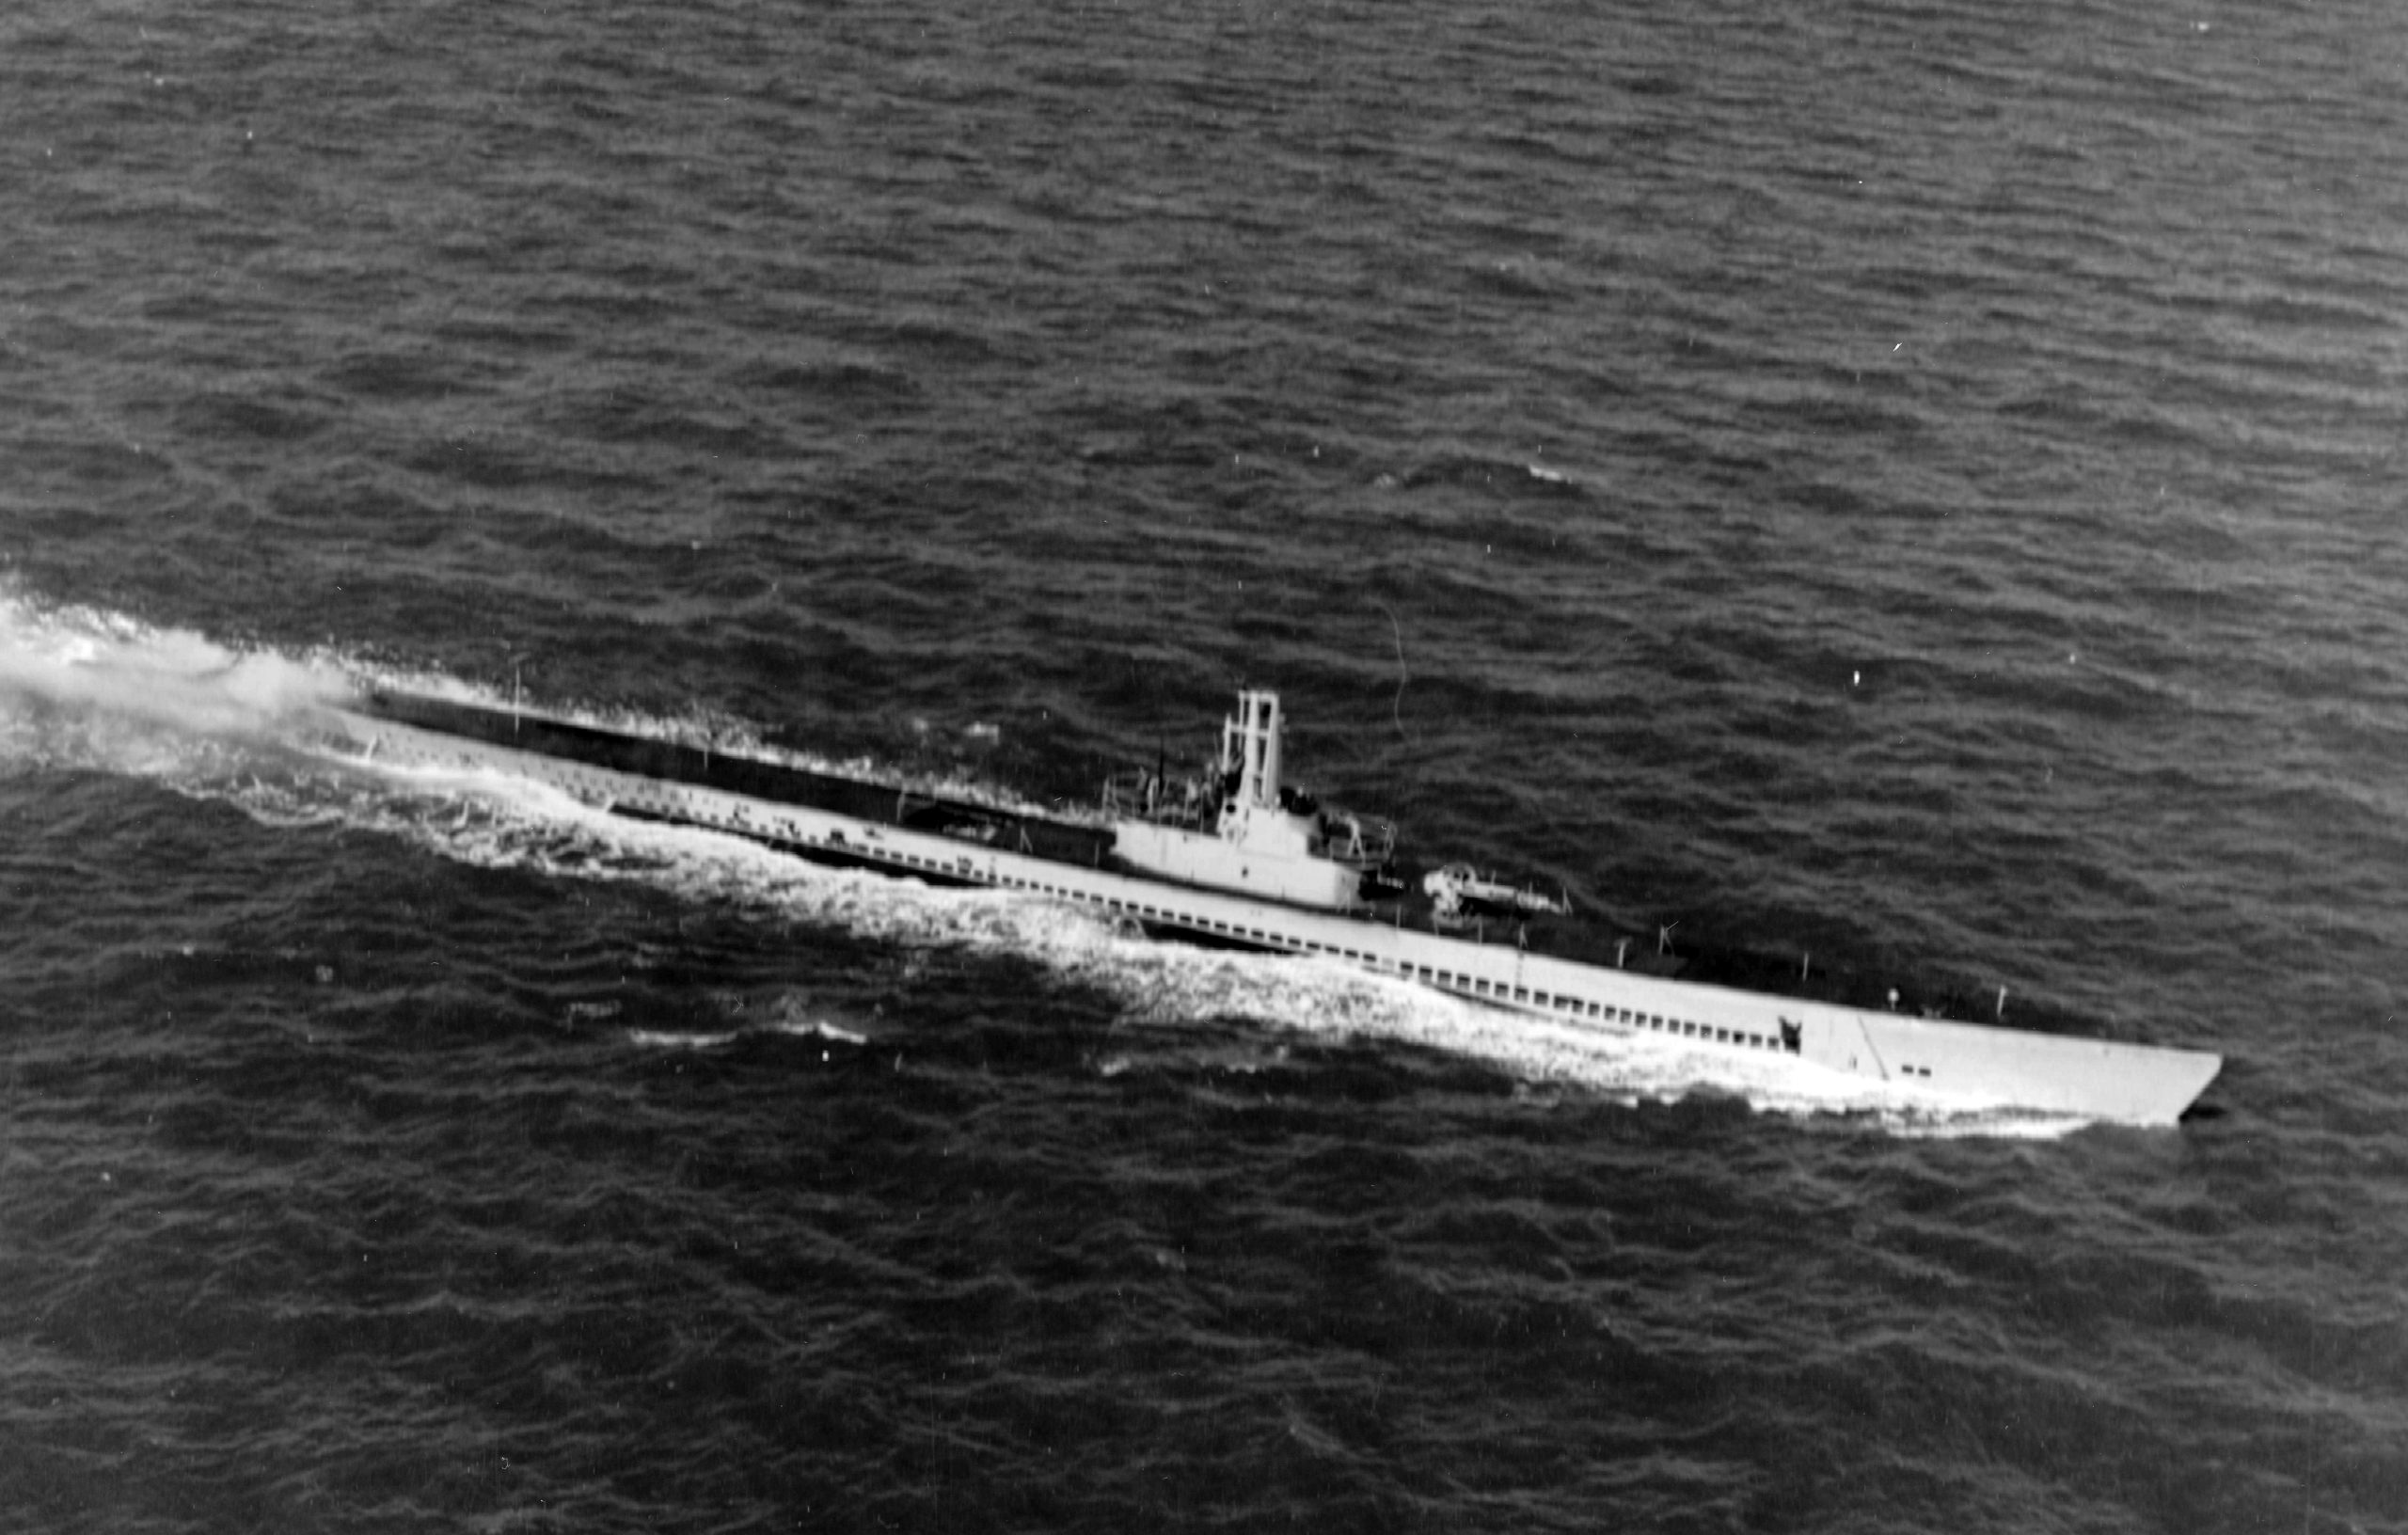 USS Devilfish – The Curious Case of the Only U.S. Navy Submarine to be Attacked by a Kamikaze